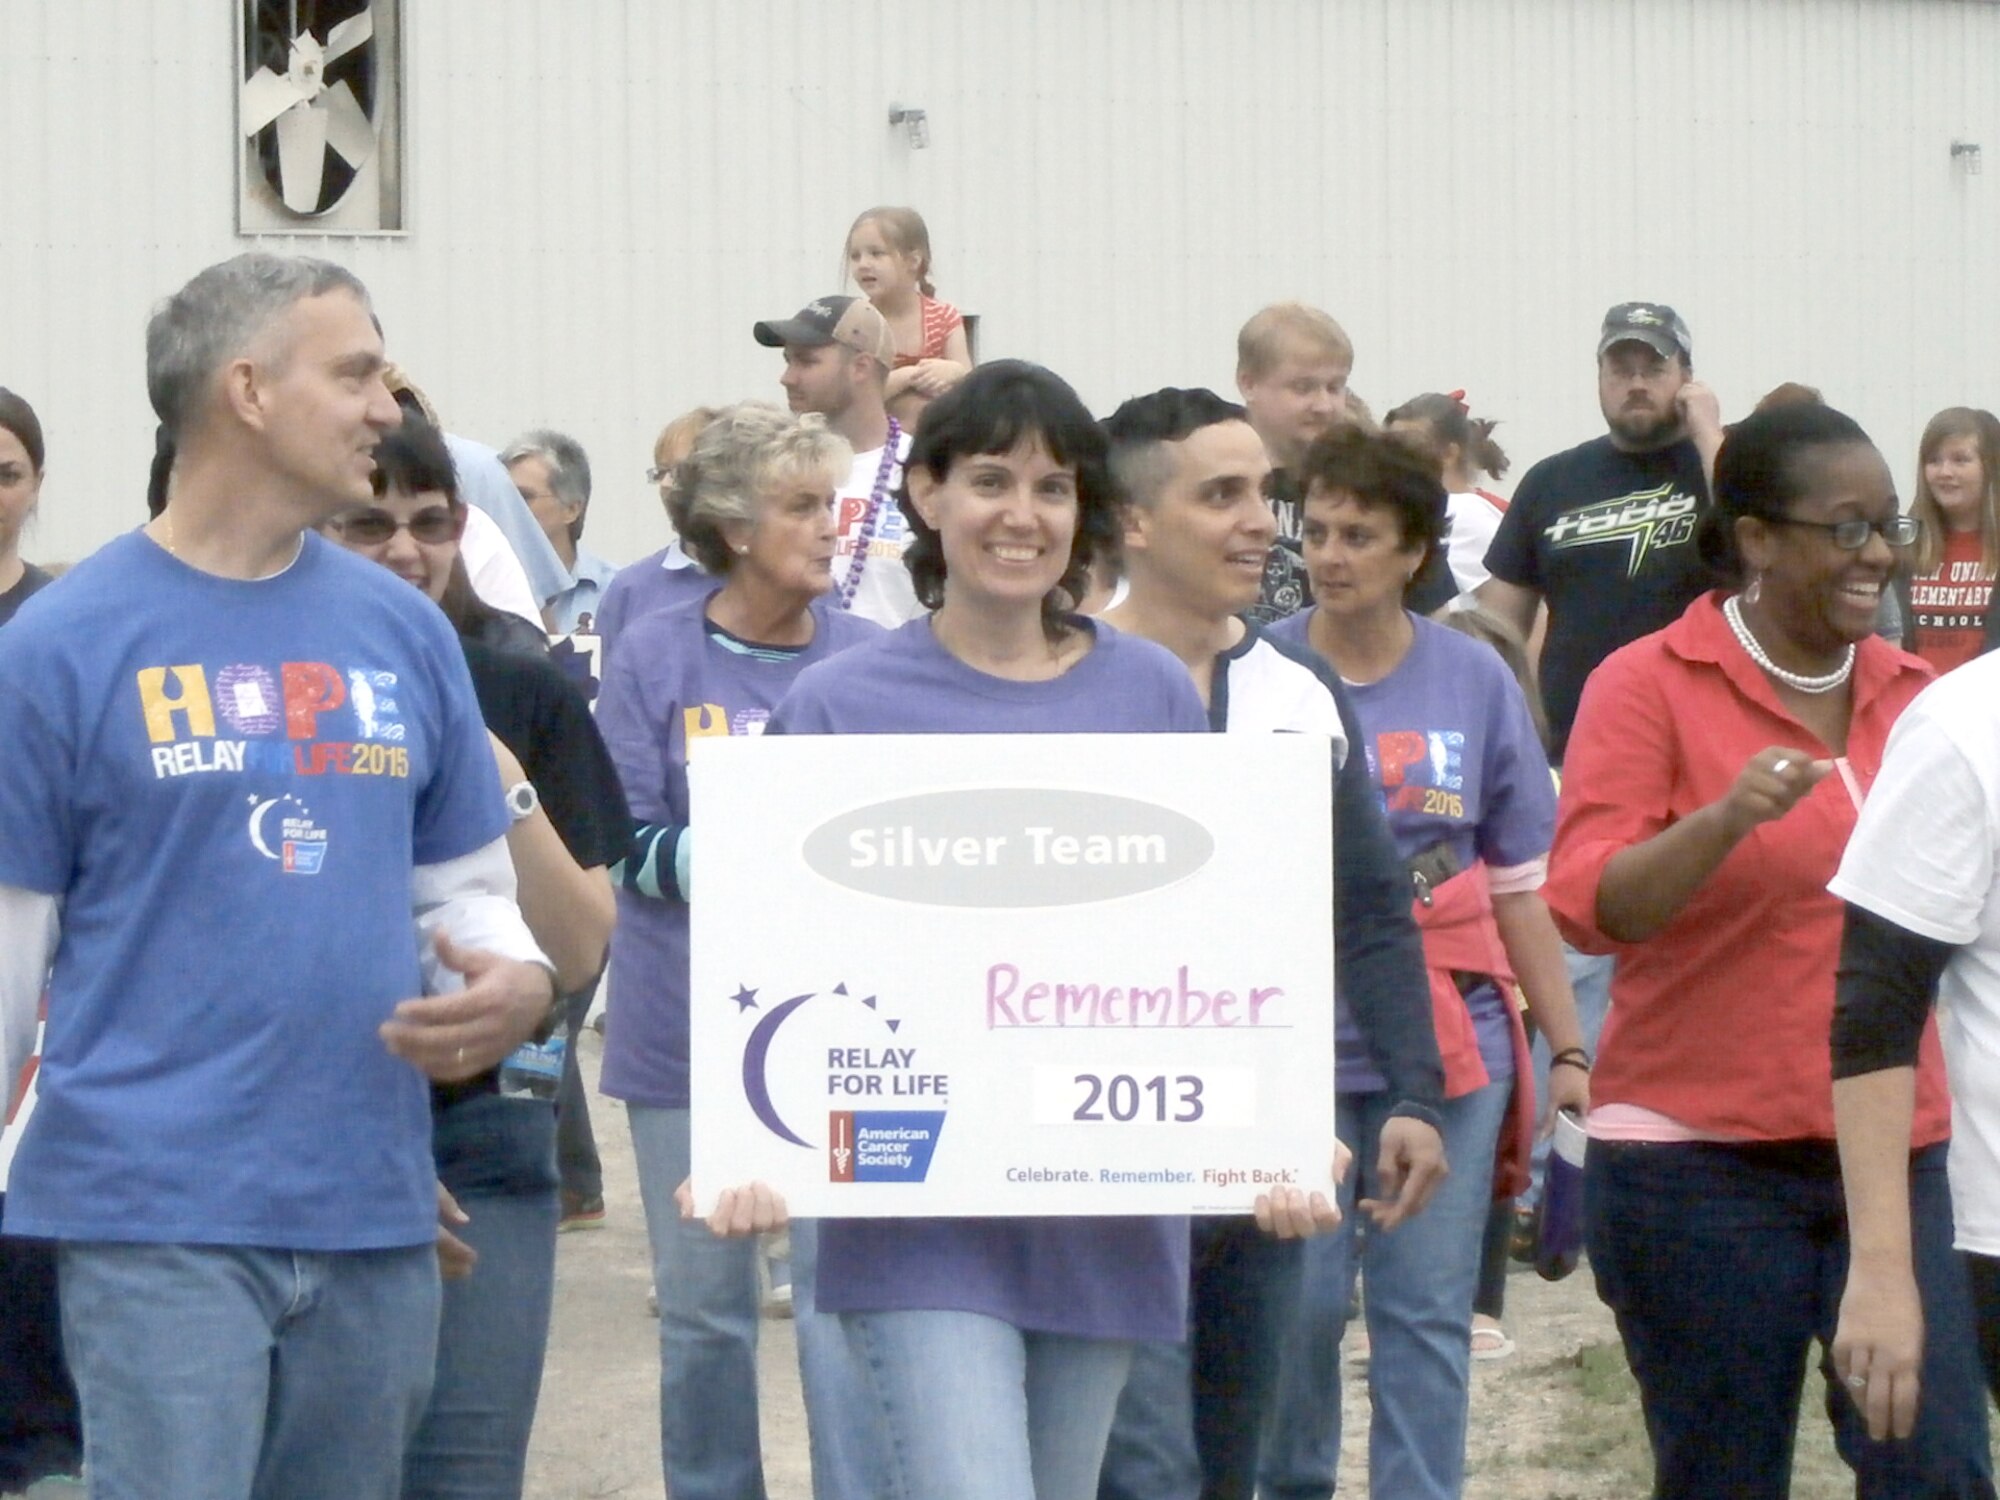 Shawn and Dee Wolfe, co-captains of Team REMEMBER, a Relay for Life team organized by AEDC employees, make laps around the track at the Coffee County Fairgrounds as part of the Relay for Life event. (Courtesy photo)